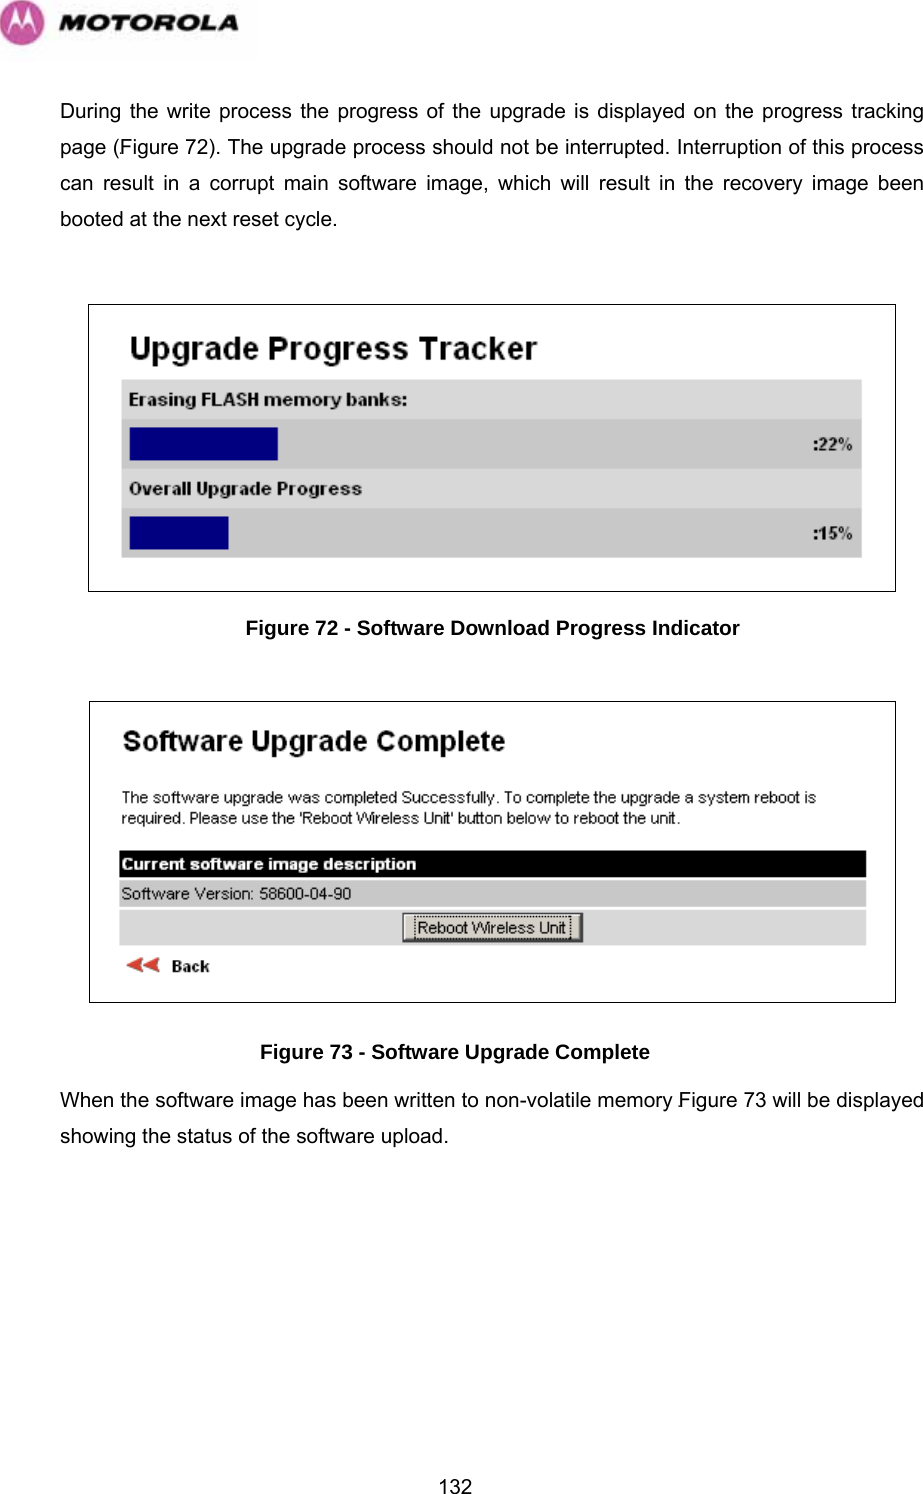   132During the write process the progress of the upgrade is displayed on the progress tracking page (1124HFigure 72). The upgrade process should not be interrupted. Interruption of this process can result in a corrupt main software image, which will result in the recovery image been booted at the next reset cycle.   Figure 72 - Software Download Progress Indicator   Figure 73 - Software Upgrade Complete  When the software image has been written to non-volatile memory 1125HFigure 73 will be displayed showing the status of the software upload. 